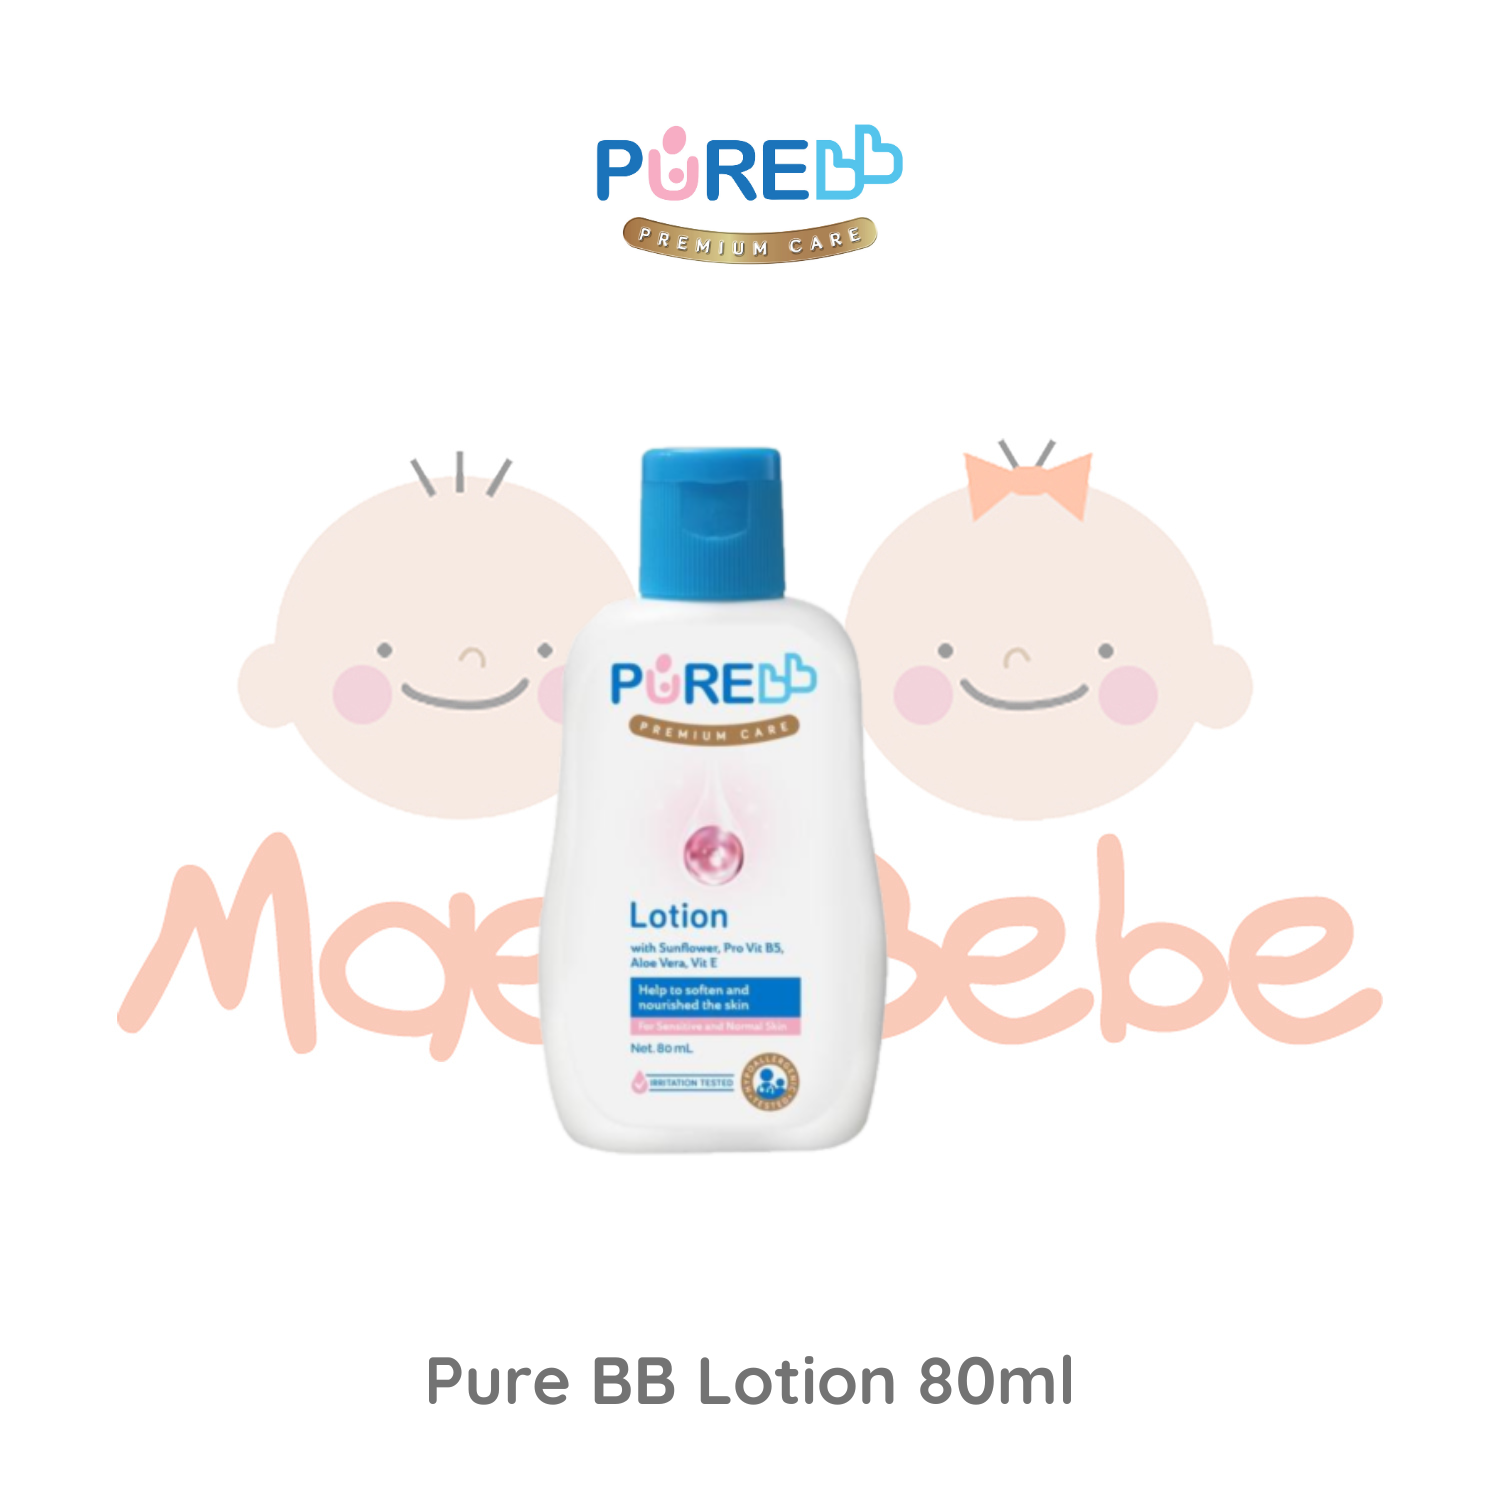 Pure BB Lotion 80ml